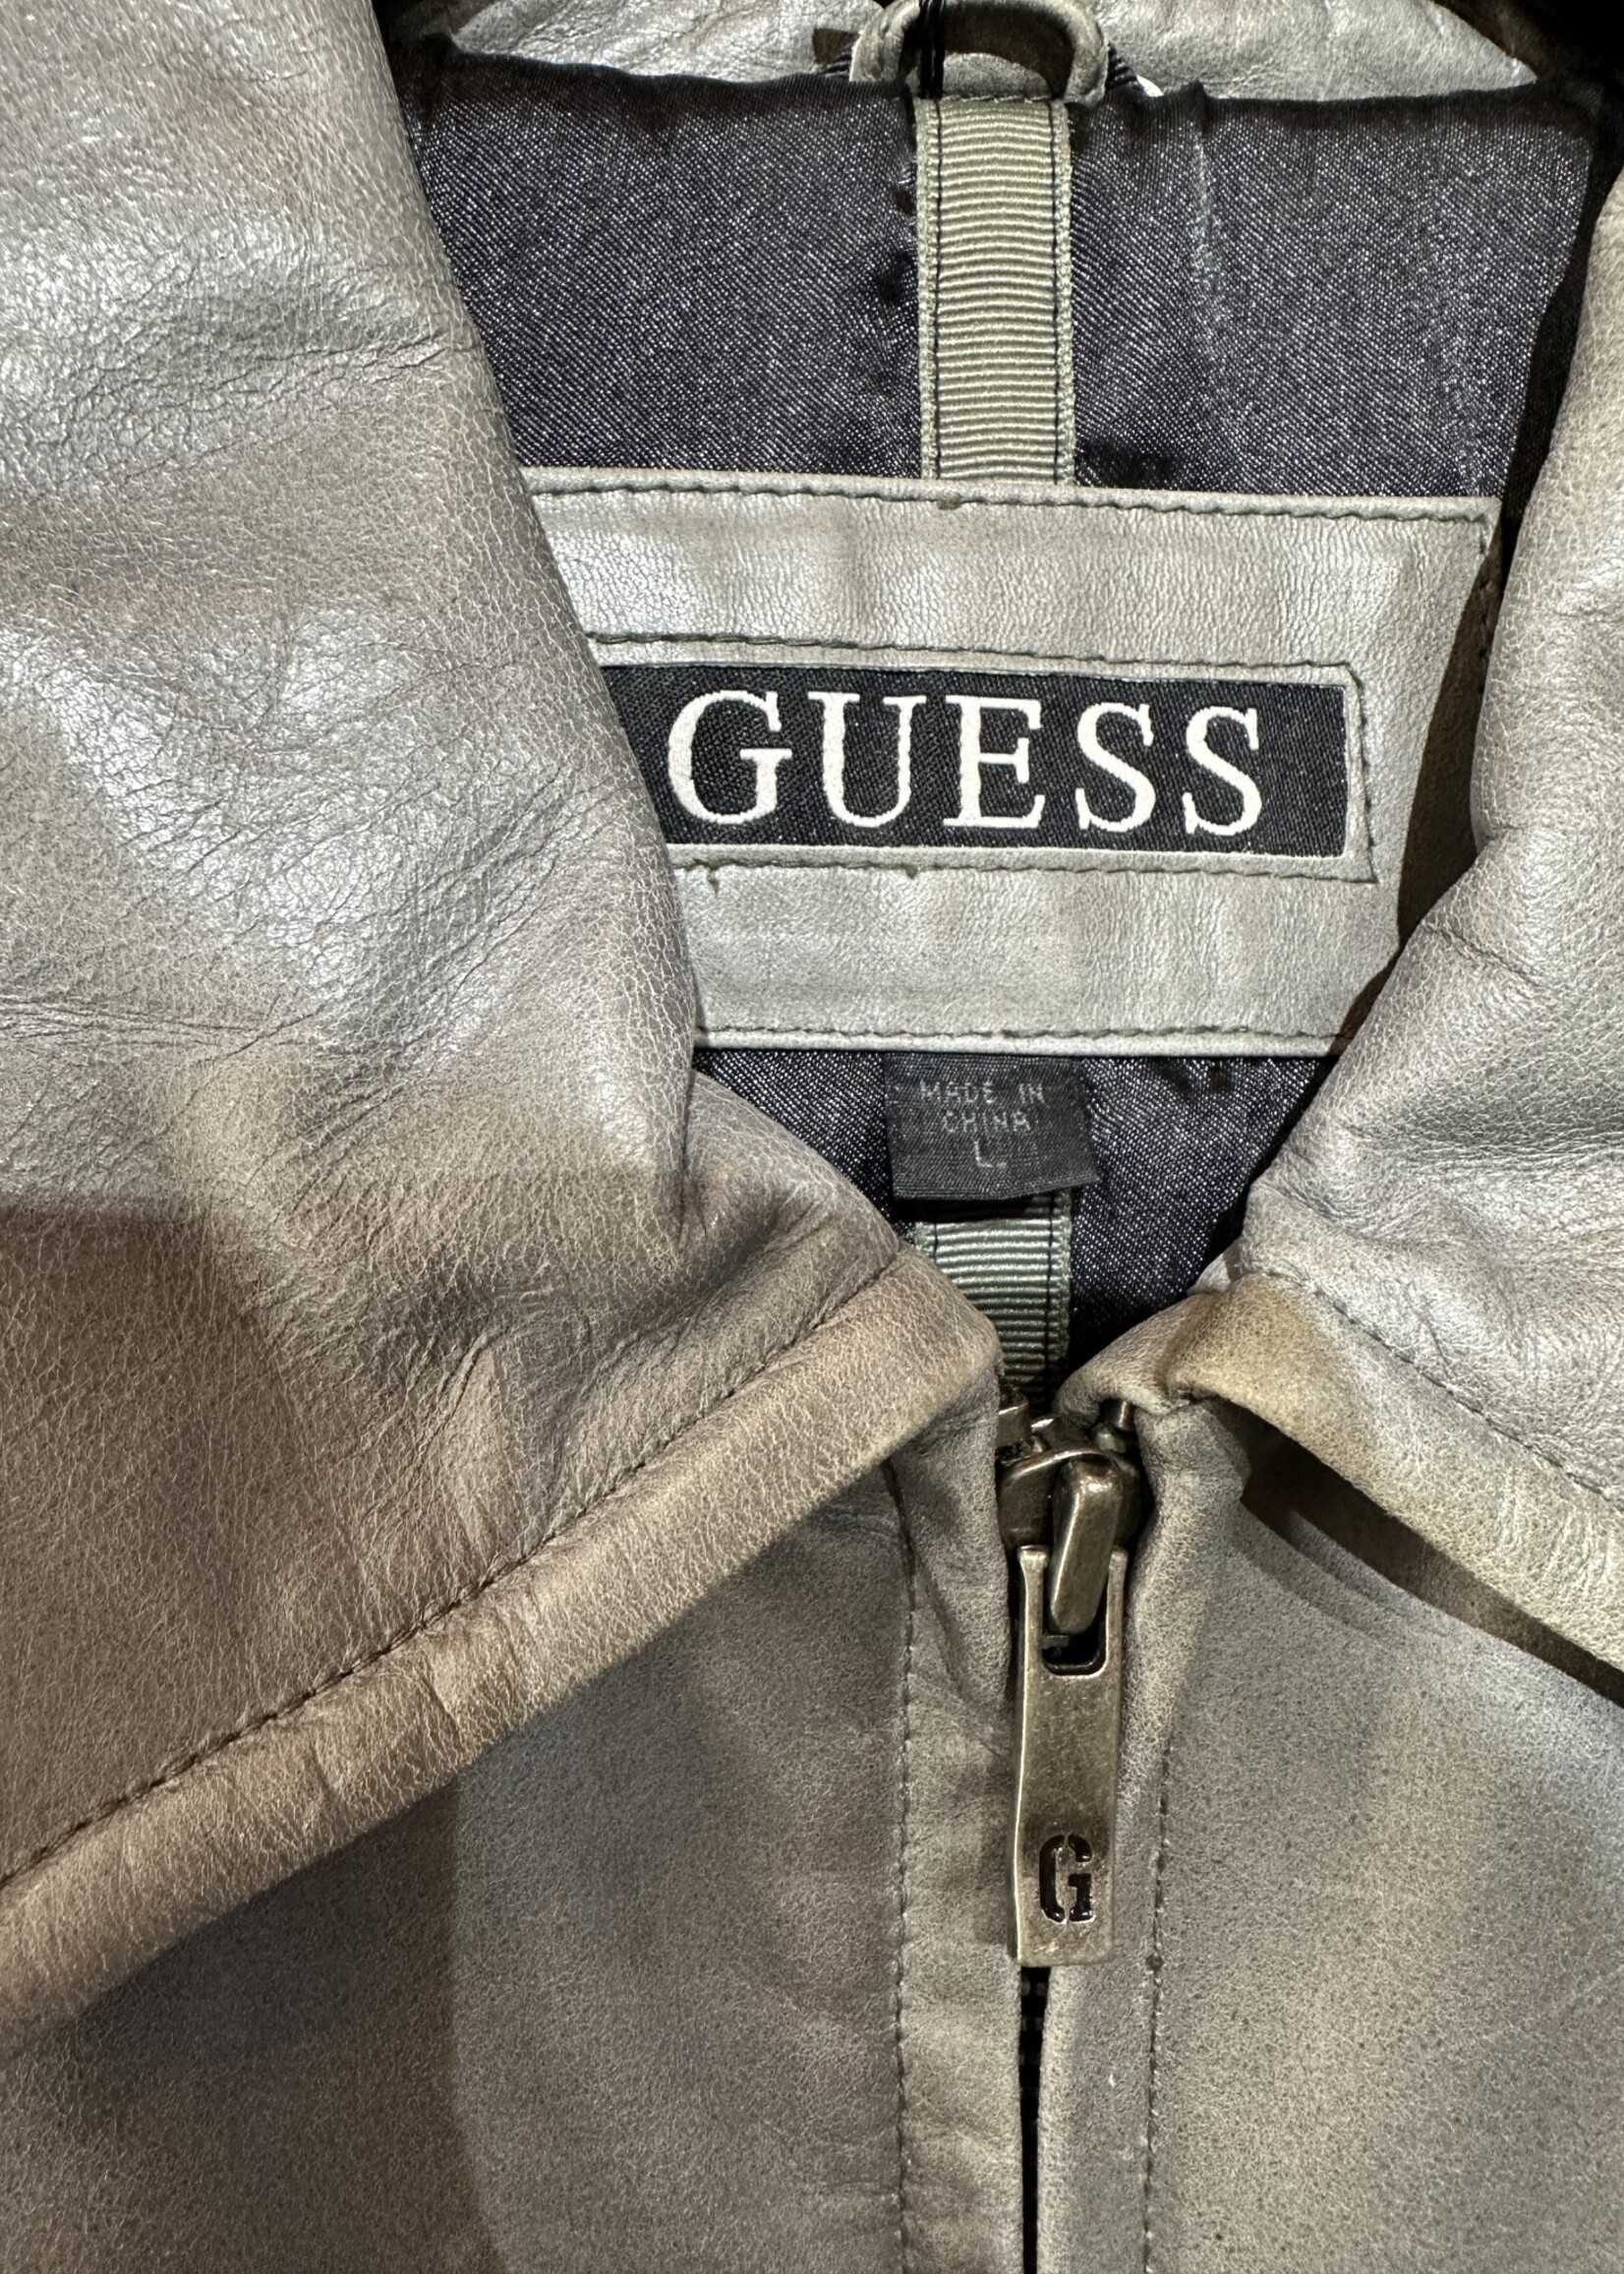 Guess Grey Leather Zip Jacket L